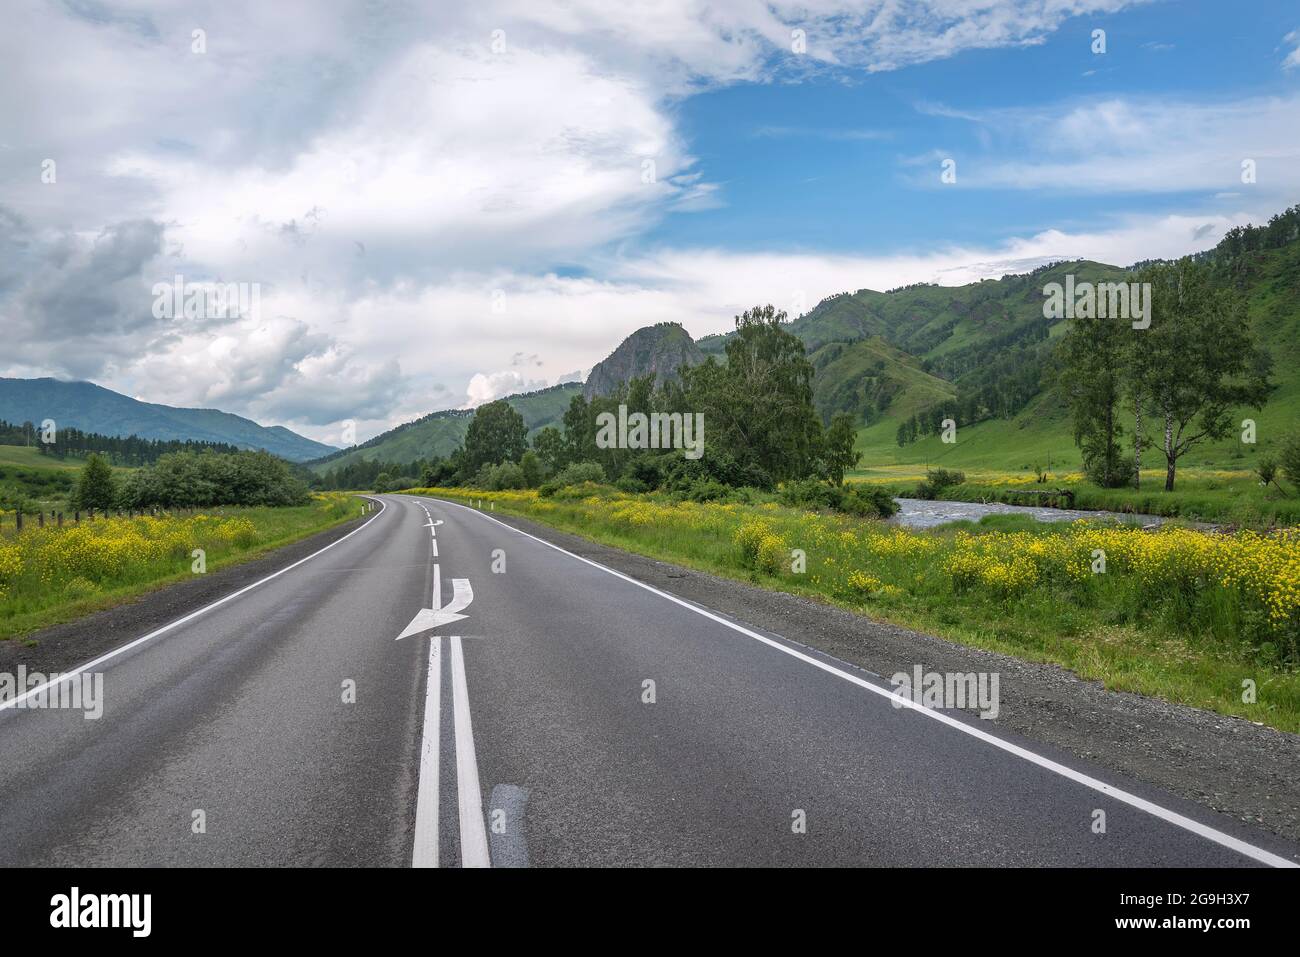 Amazing view with an asphalt road in the mountains, a river, trees and bright yellow flowers on the roadside against the backdrop of blue sky and clou Stock Photo